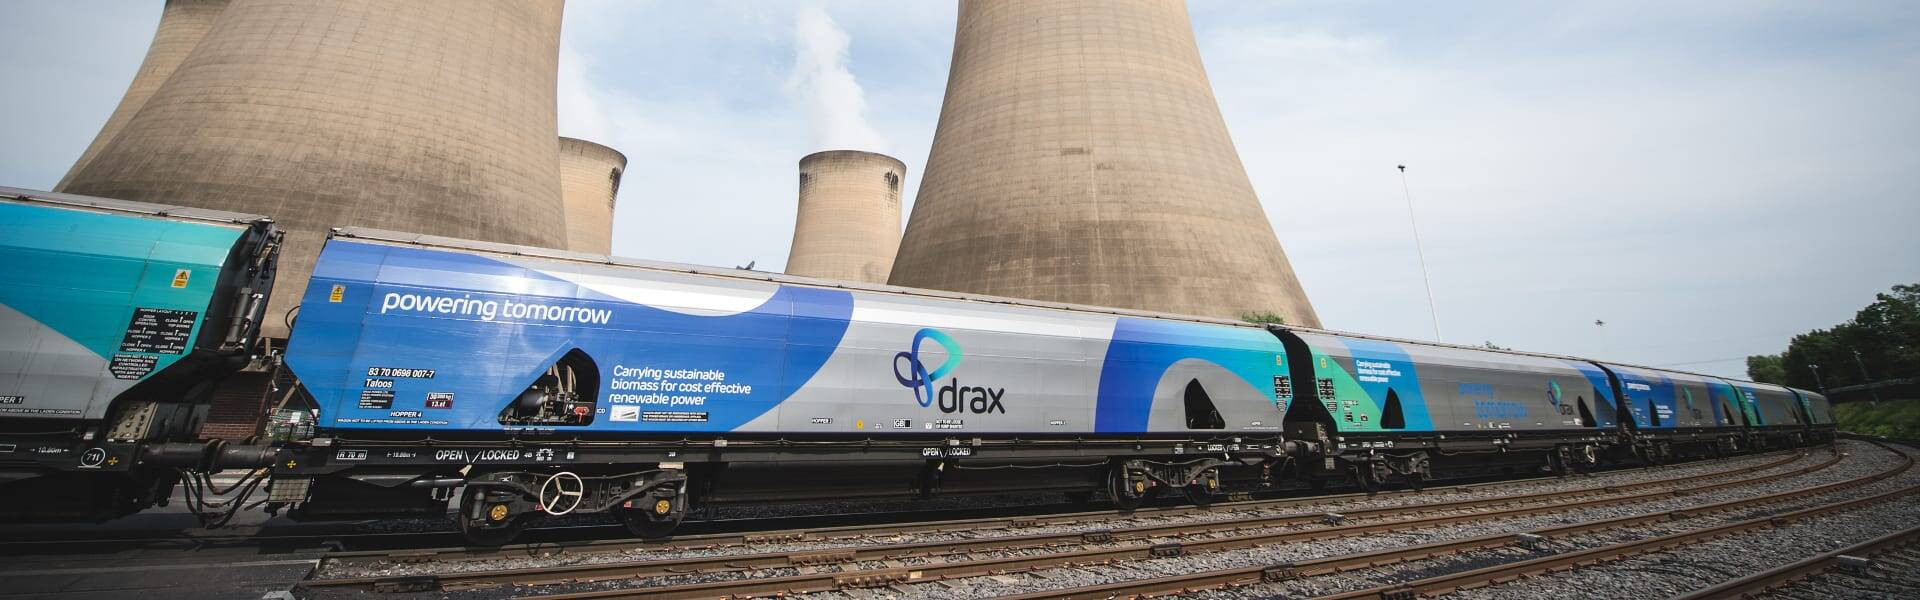 Plan to extend Drax biomass subsidy sparks backlash